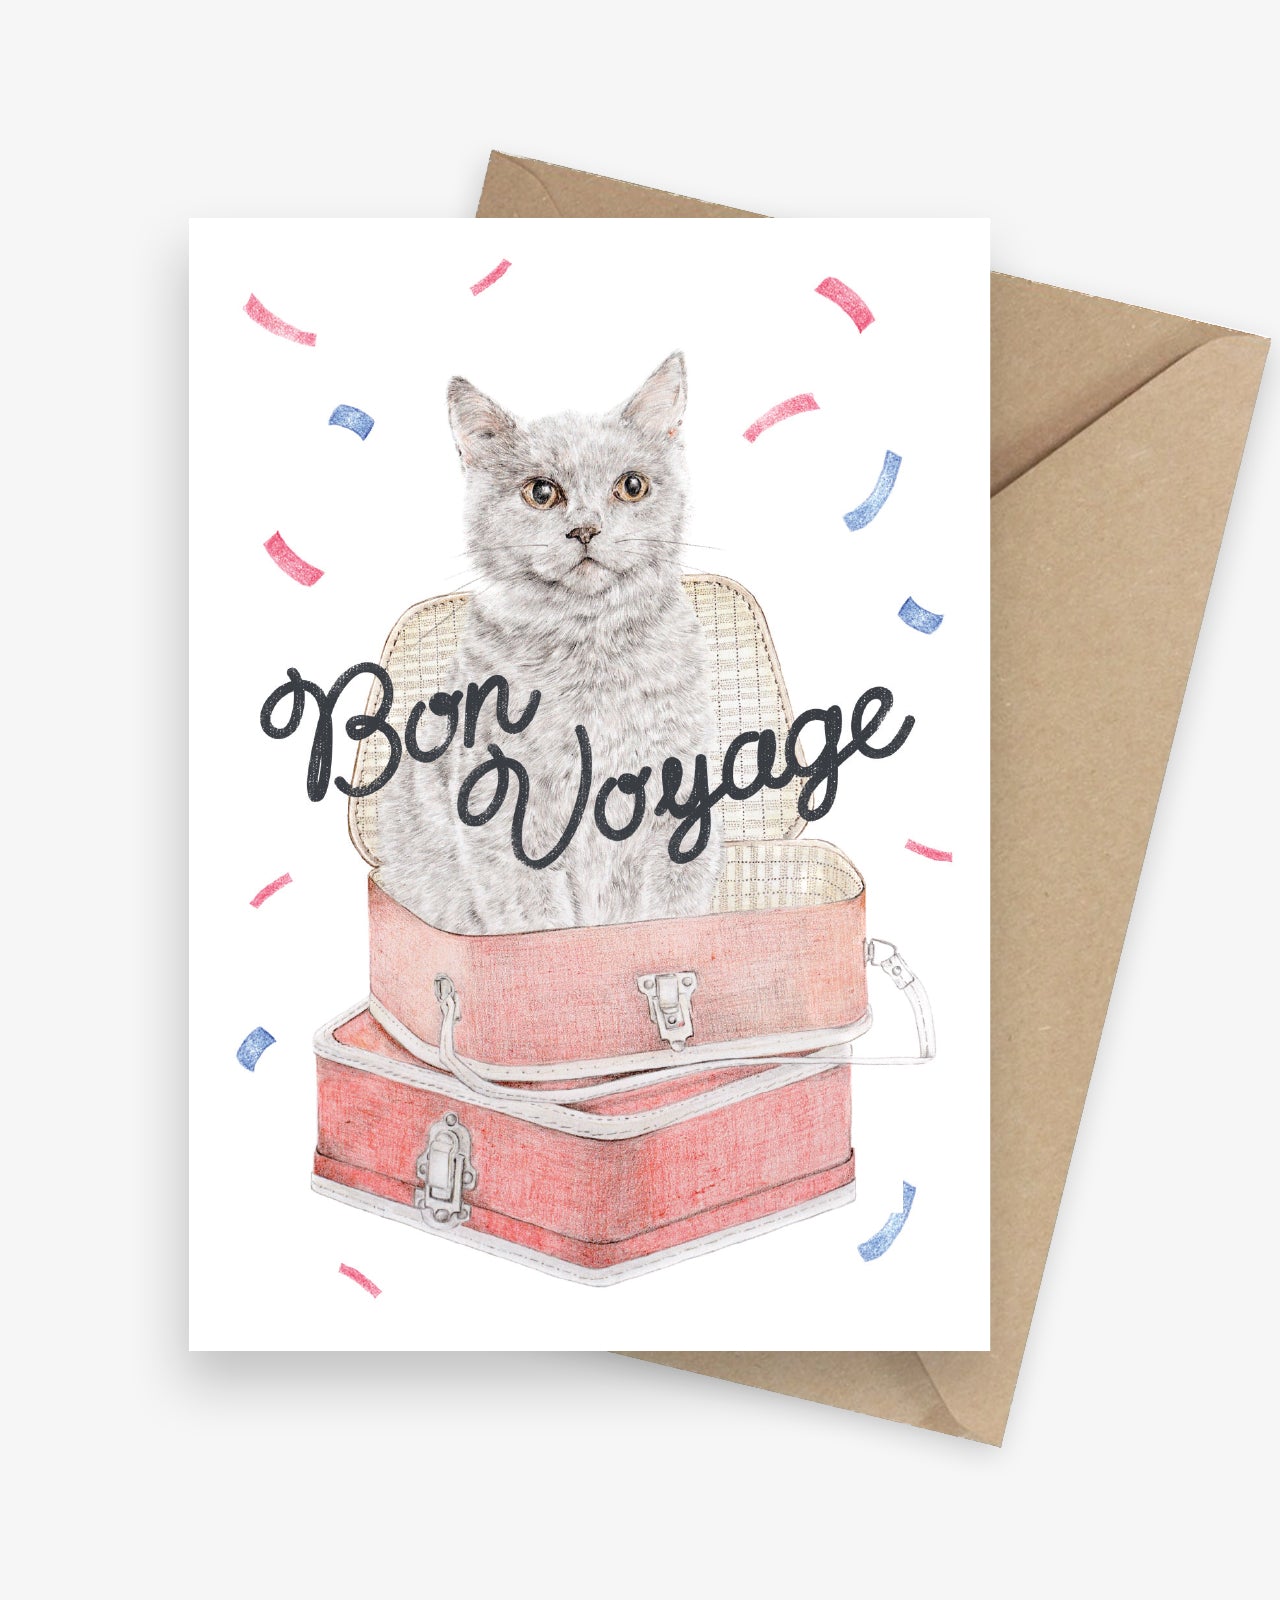 Bon voyage greeting card featuring a cat in a suitcase with confetti.